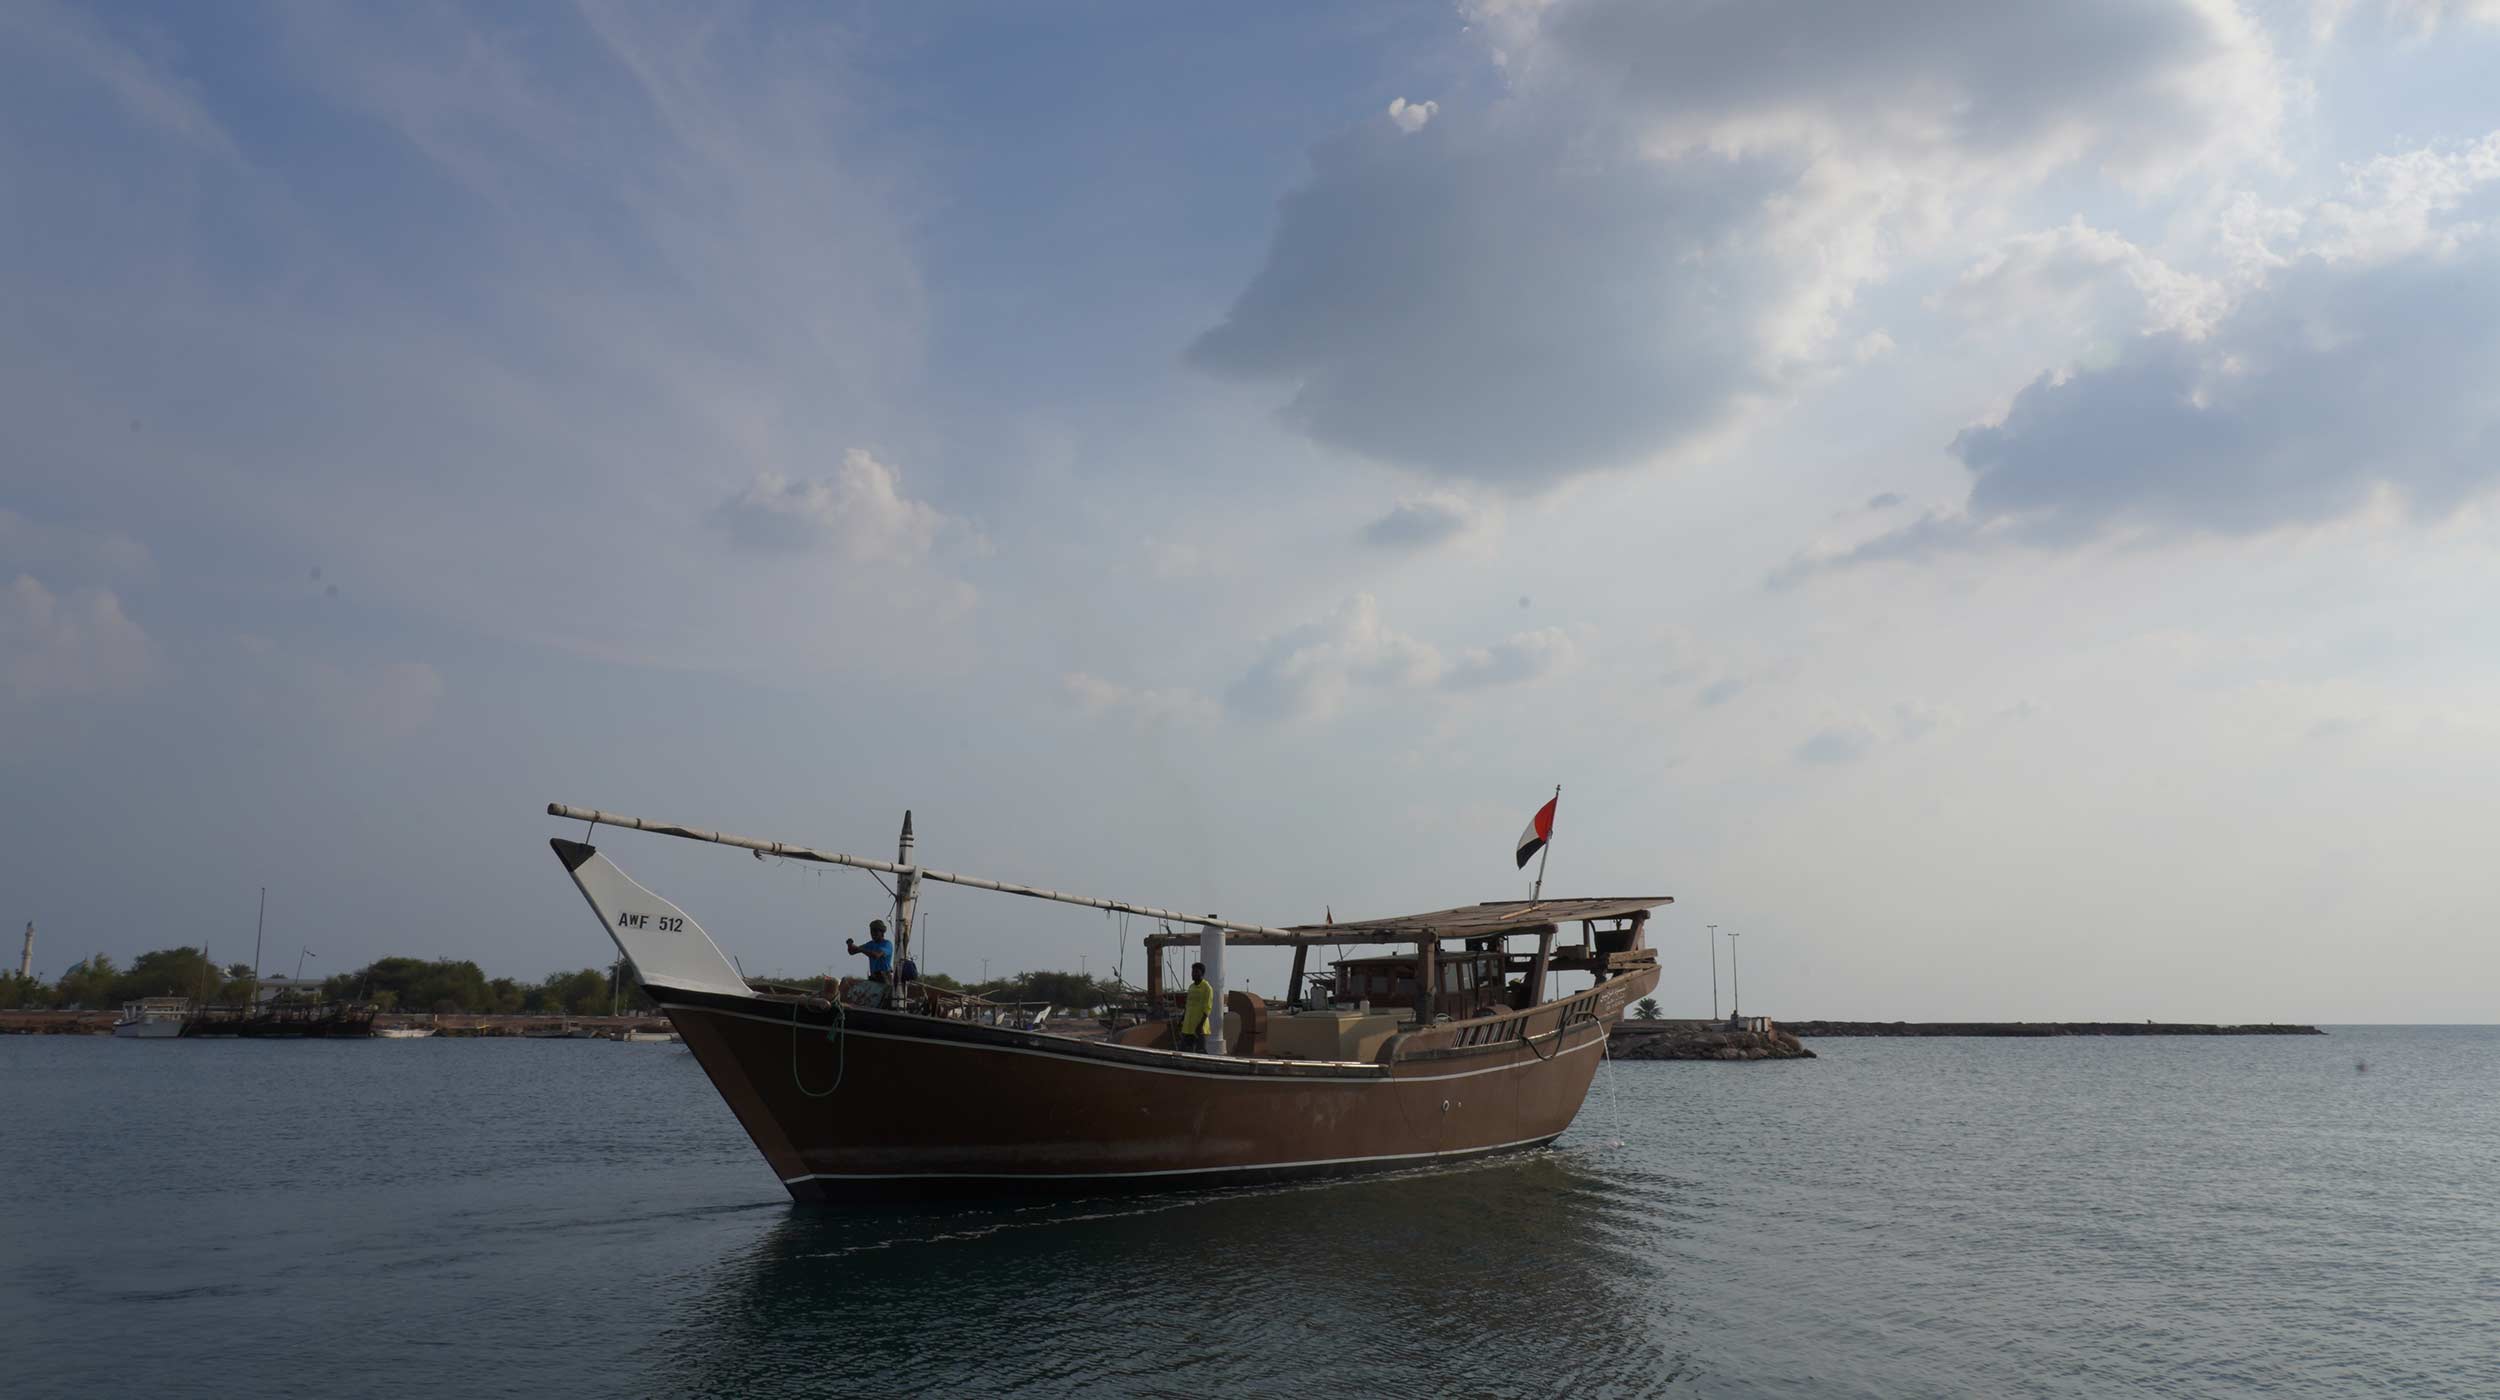 Traditional Emirati boat on the waters in the Emirate of Abu Dhabi